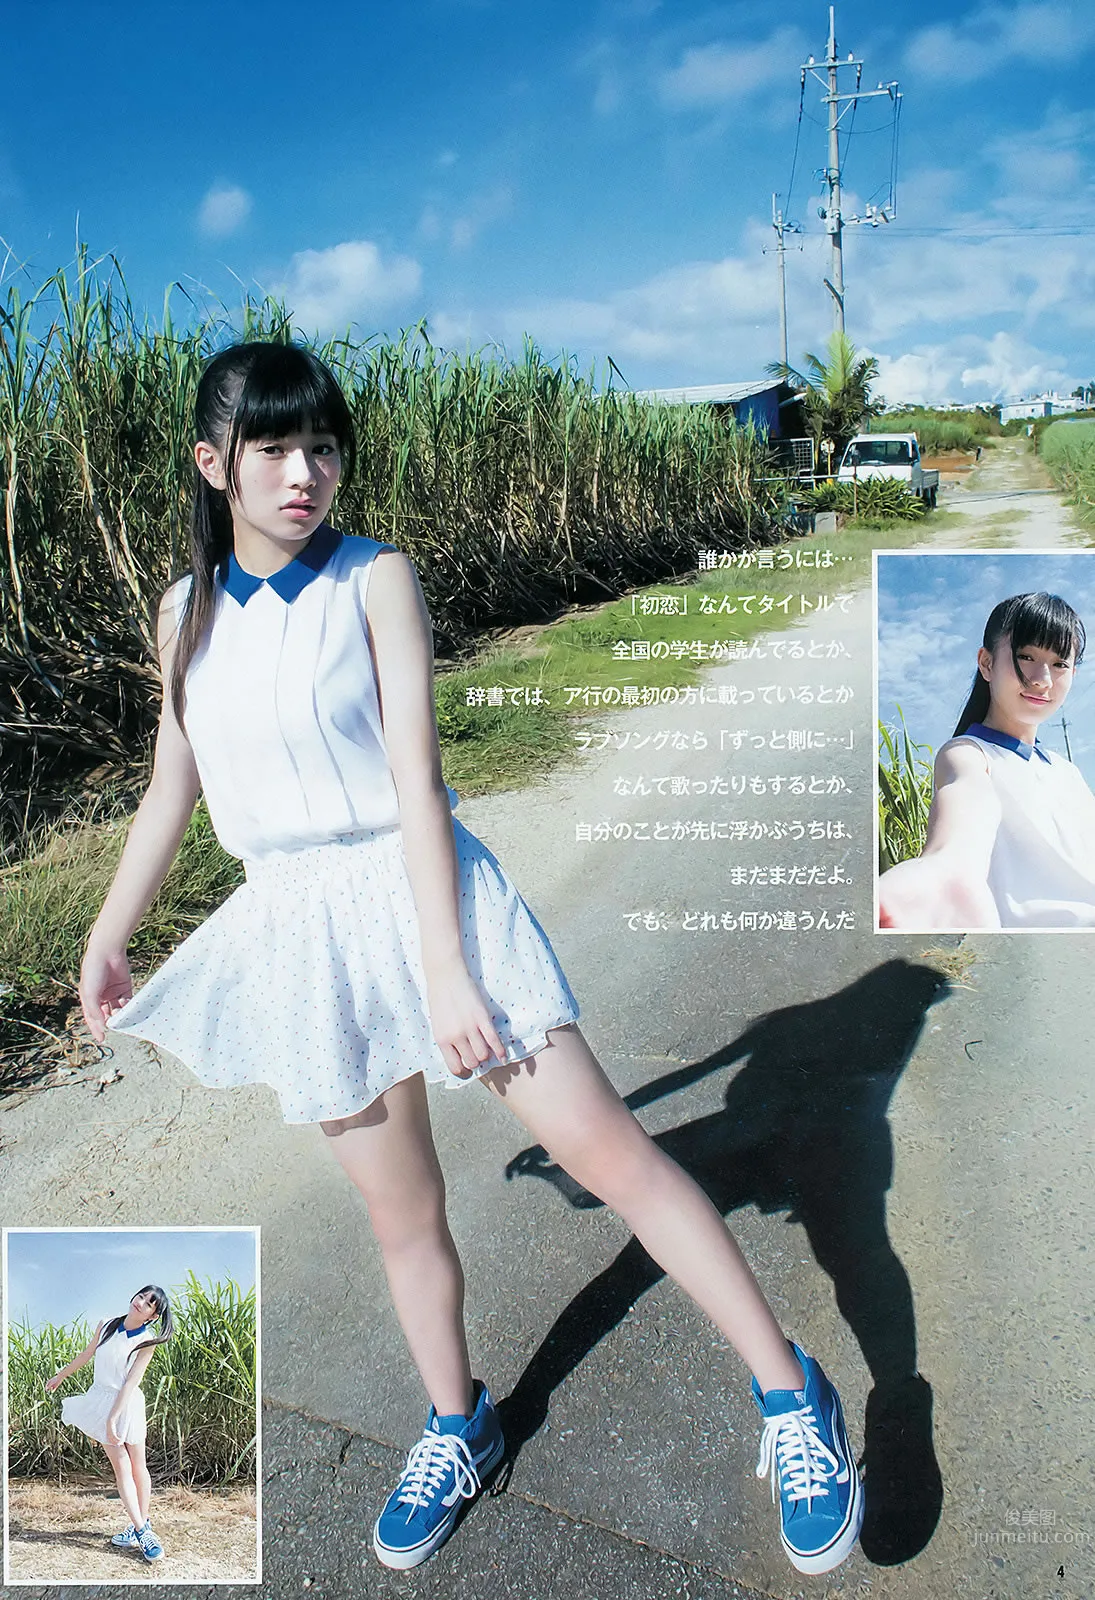 [Weekly Young Jump] 2015 No.44 45 伊藤萌々香 松井珠理奈 篠崎愛 内田理央_8